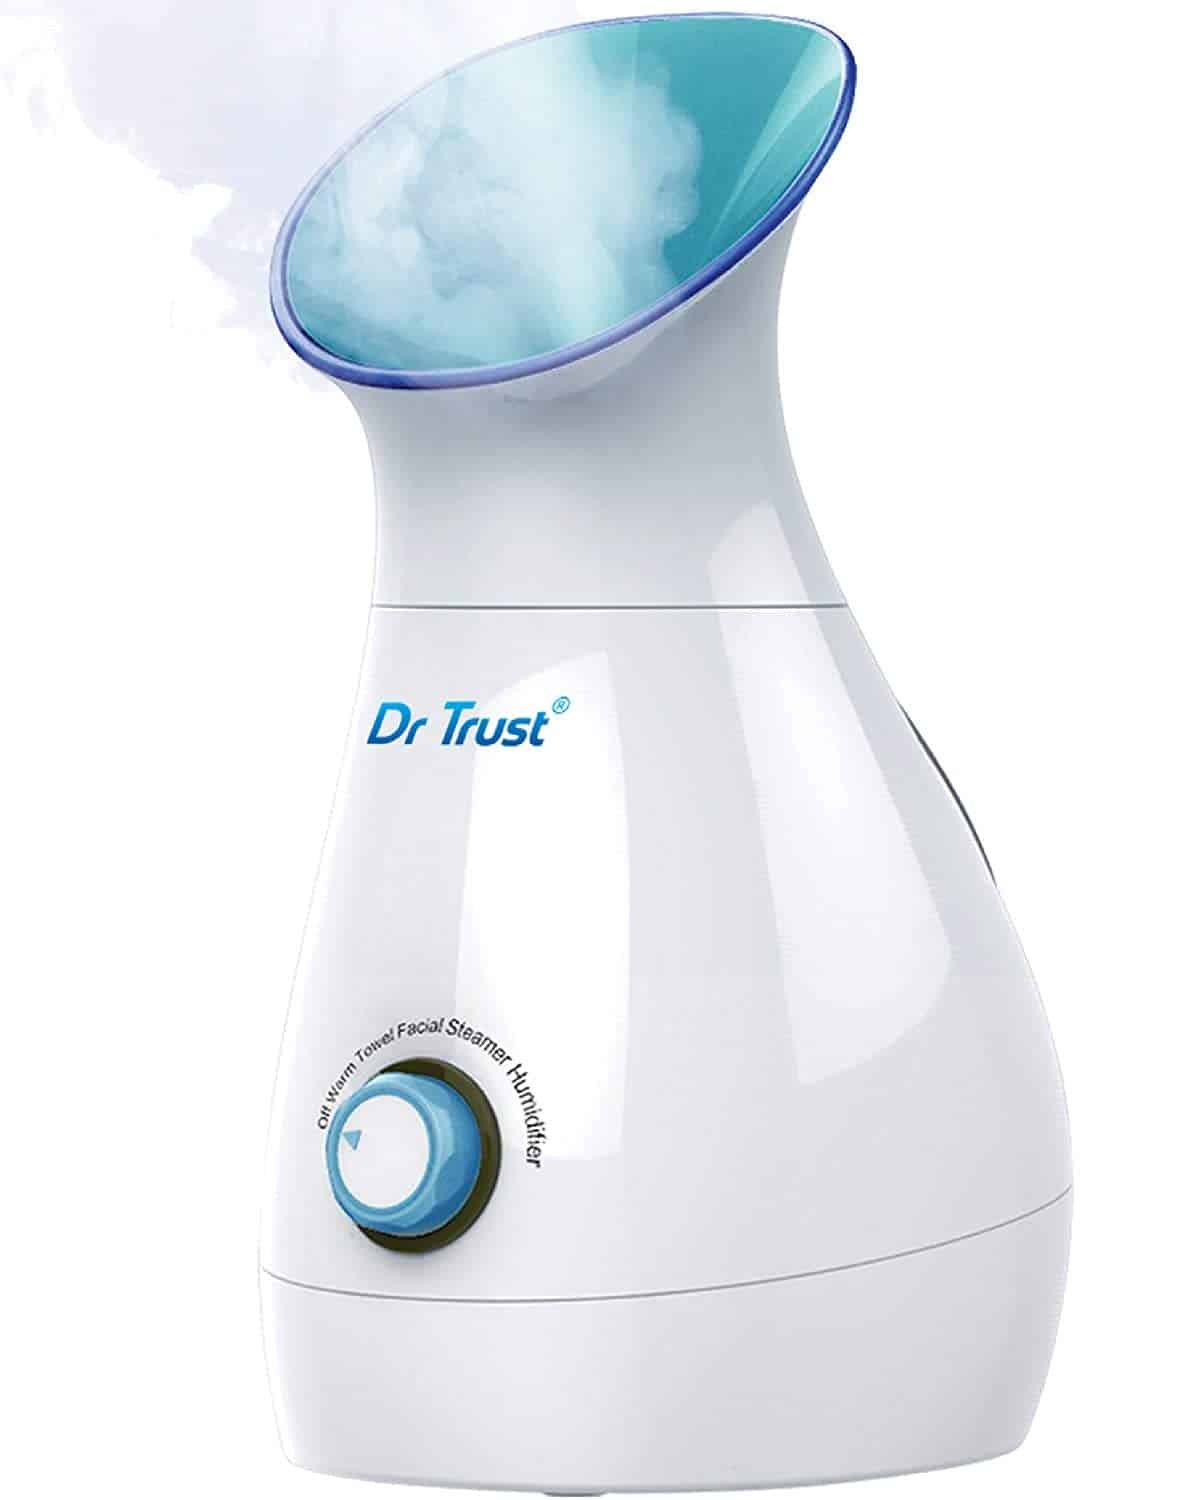 Dr Trust USA 3-in-1 Nano Ionic Facial Steamer Vaporizer Room Humidifier and Towel Warmer (White)